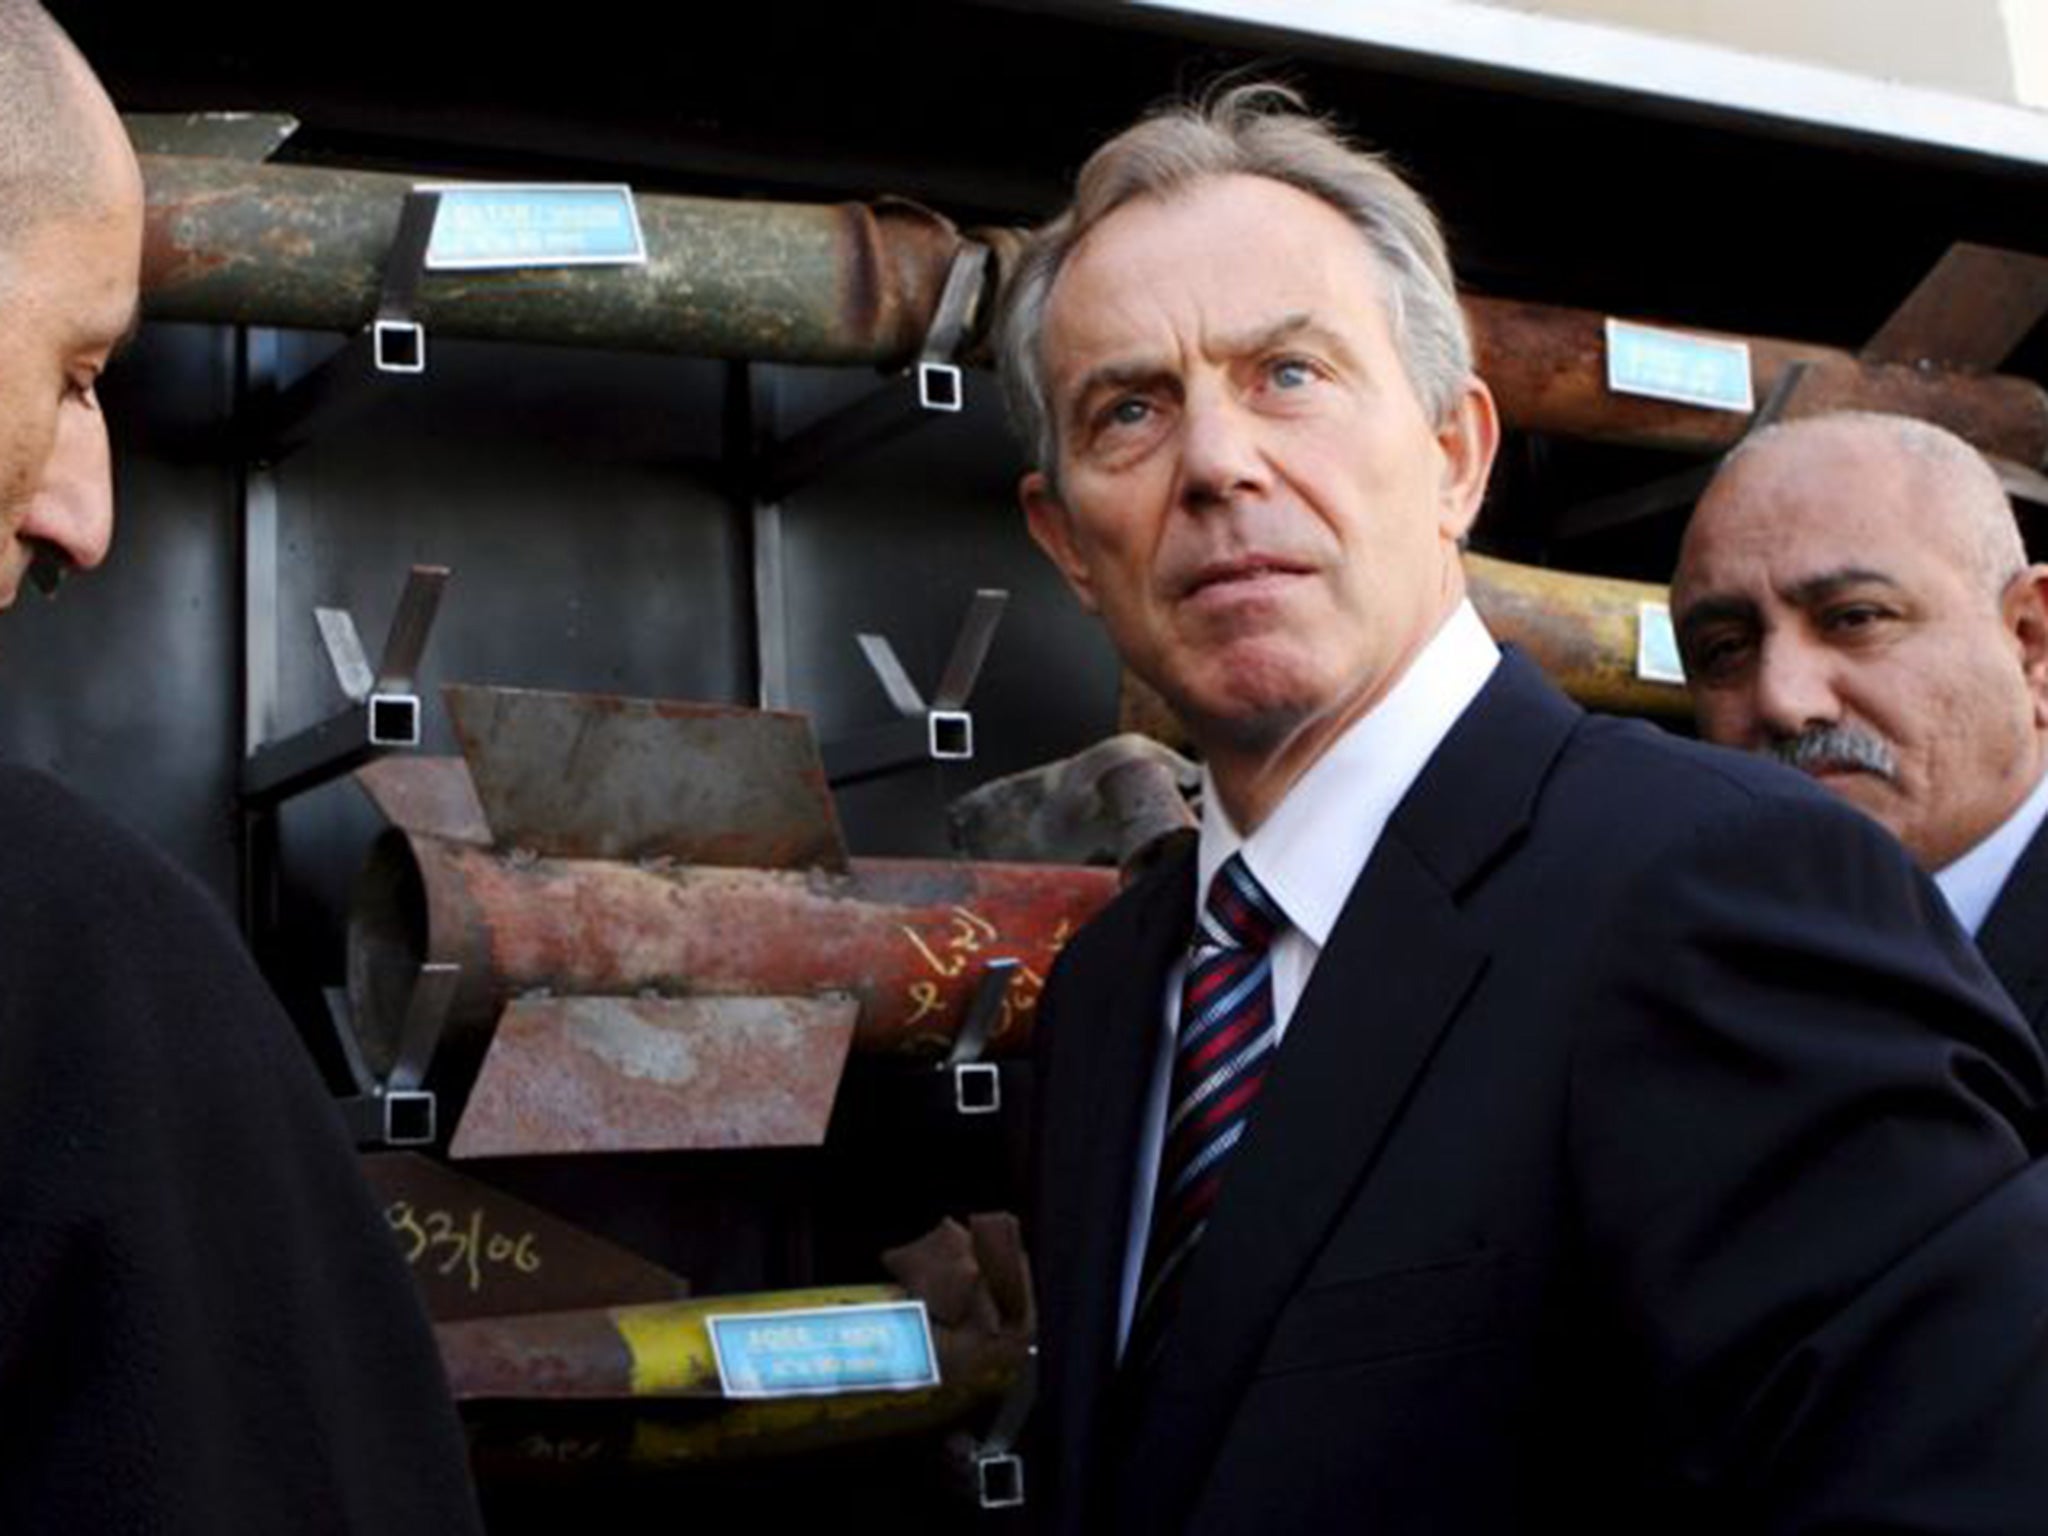 Blair has tried to persuade Labour voters of the dangers of voting for Jeremy Corbyn